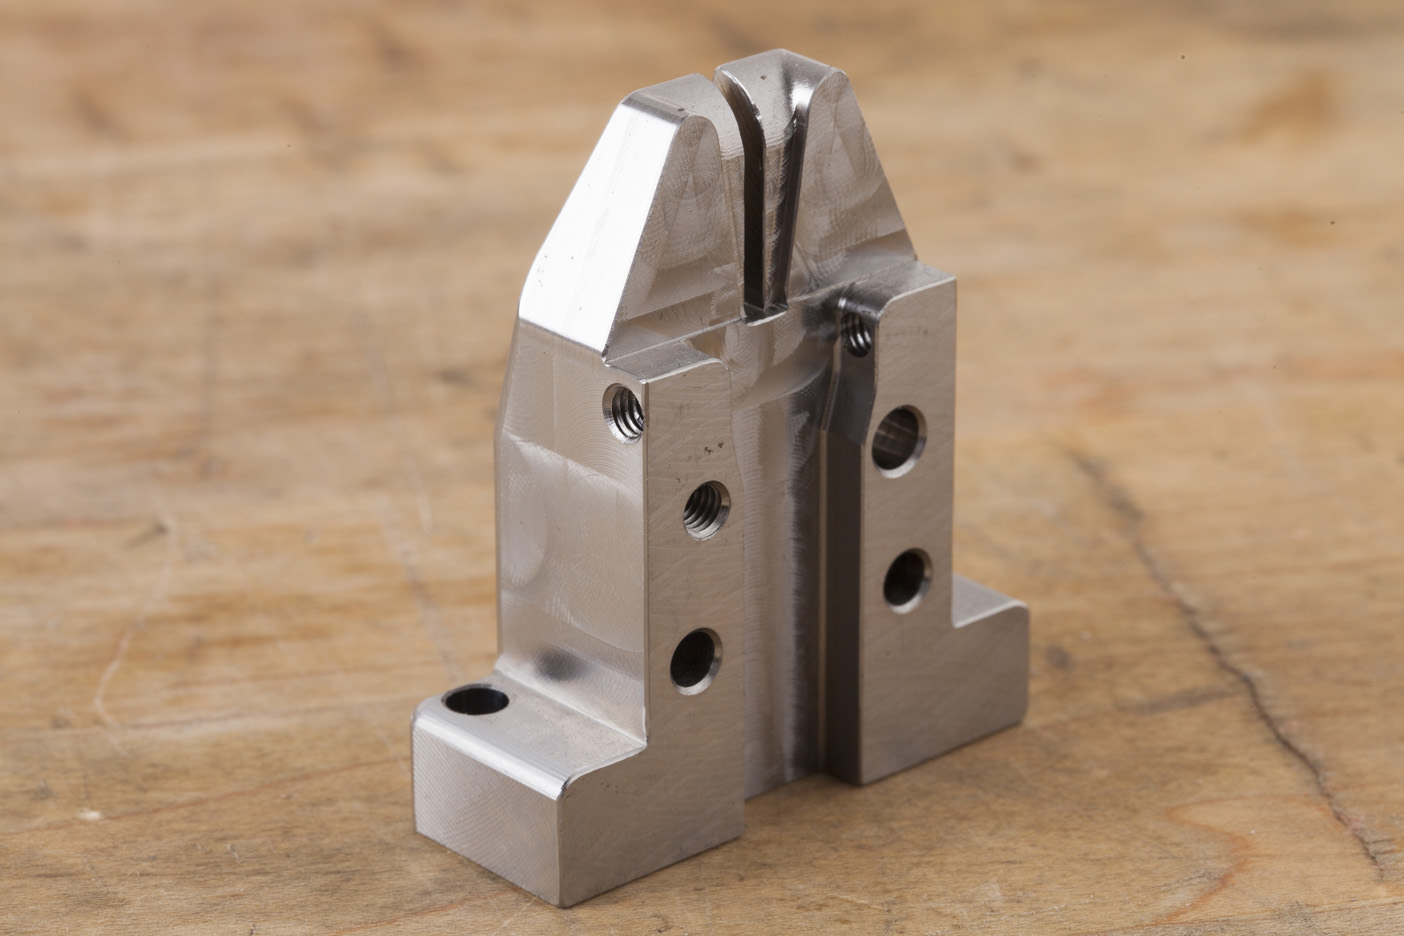 Tooling clip for Automation Equipment, Automotive 4140 PH, machined on the PS95 CNC Mill using 5 setups, high volume